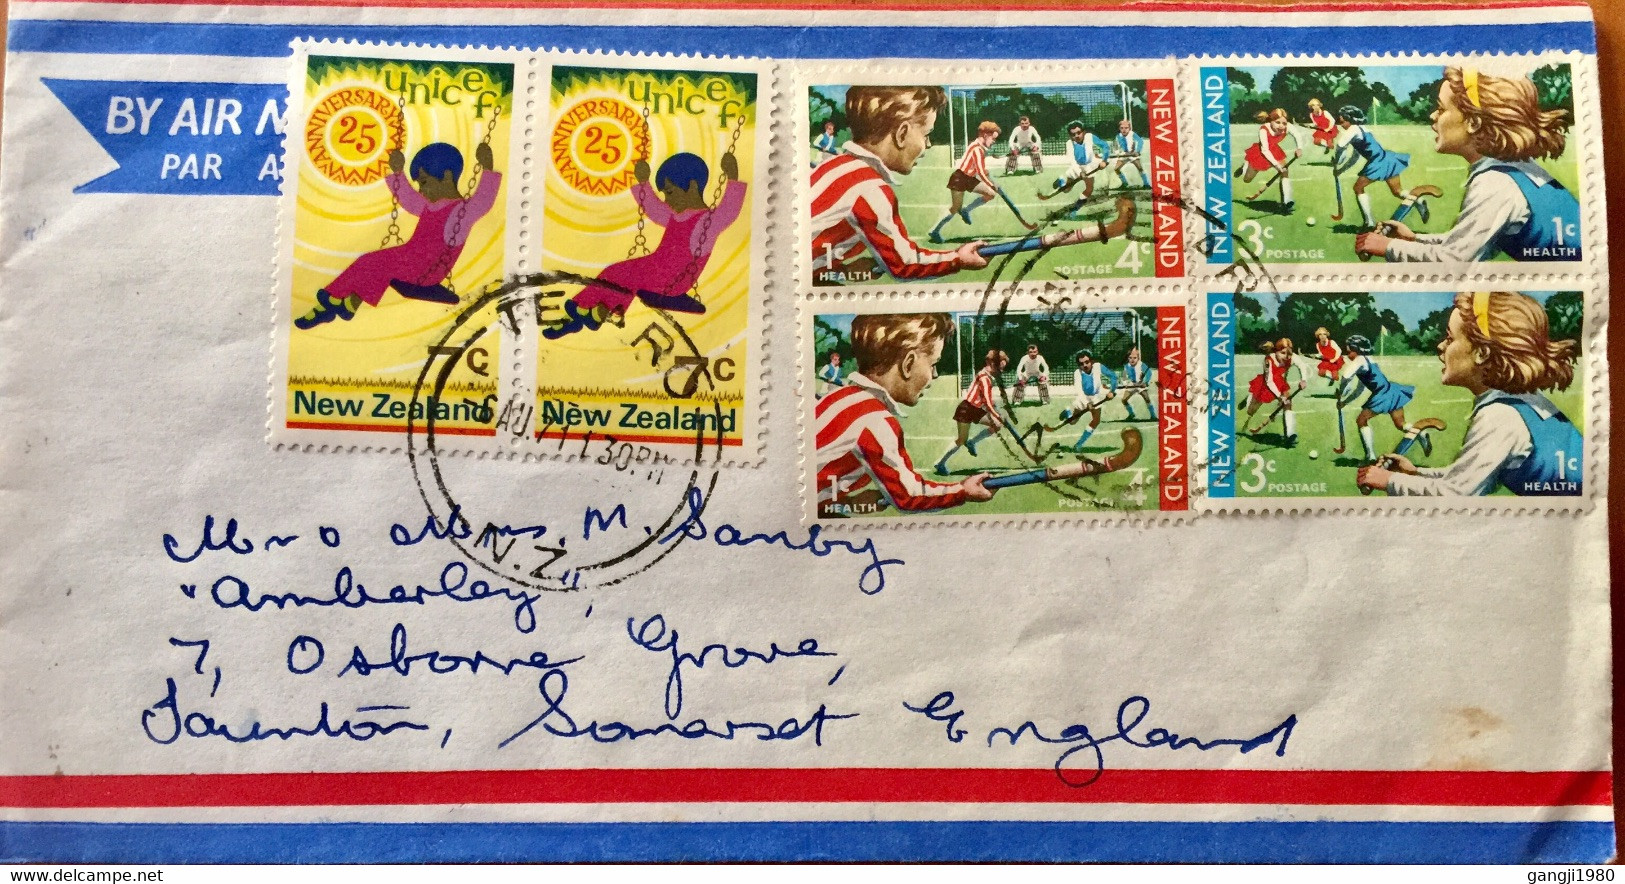 NEW ZEALAND 1971, USED AIRMAIL COVER TO ENGLAND HEALTH,HOCKEY GIRL PLAYERS SWIMMING CHILD 6 STAMPS!!! TEARO CANCELLATIO! - Lettres & Documents